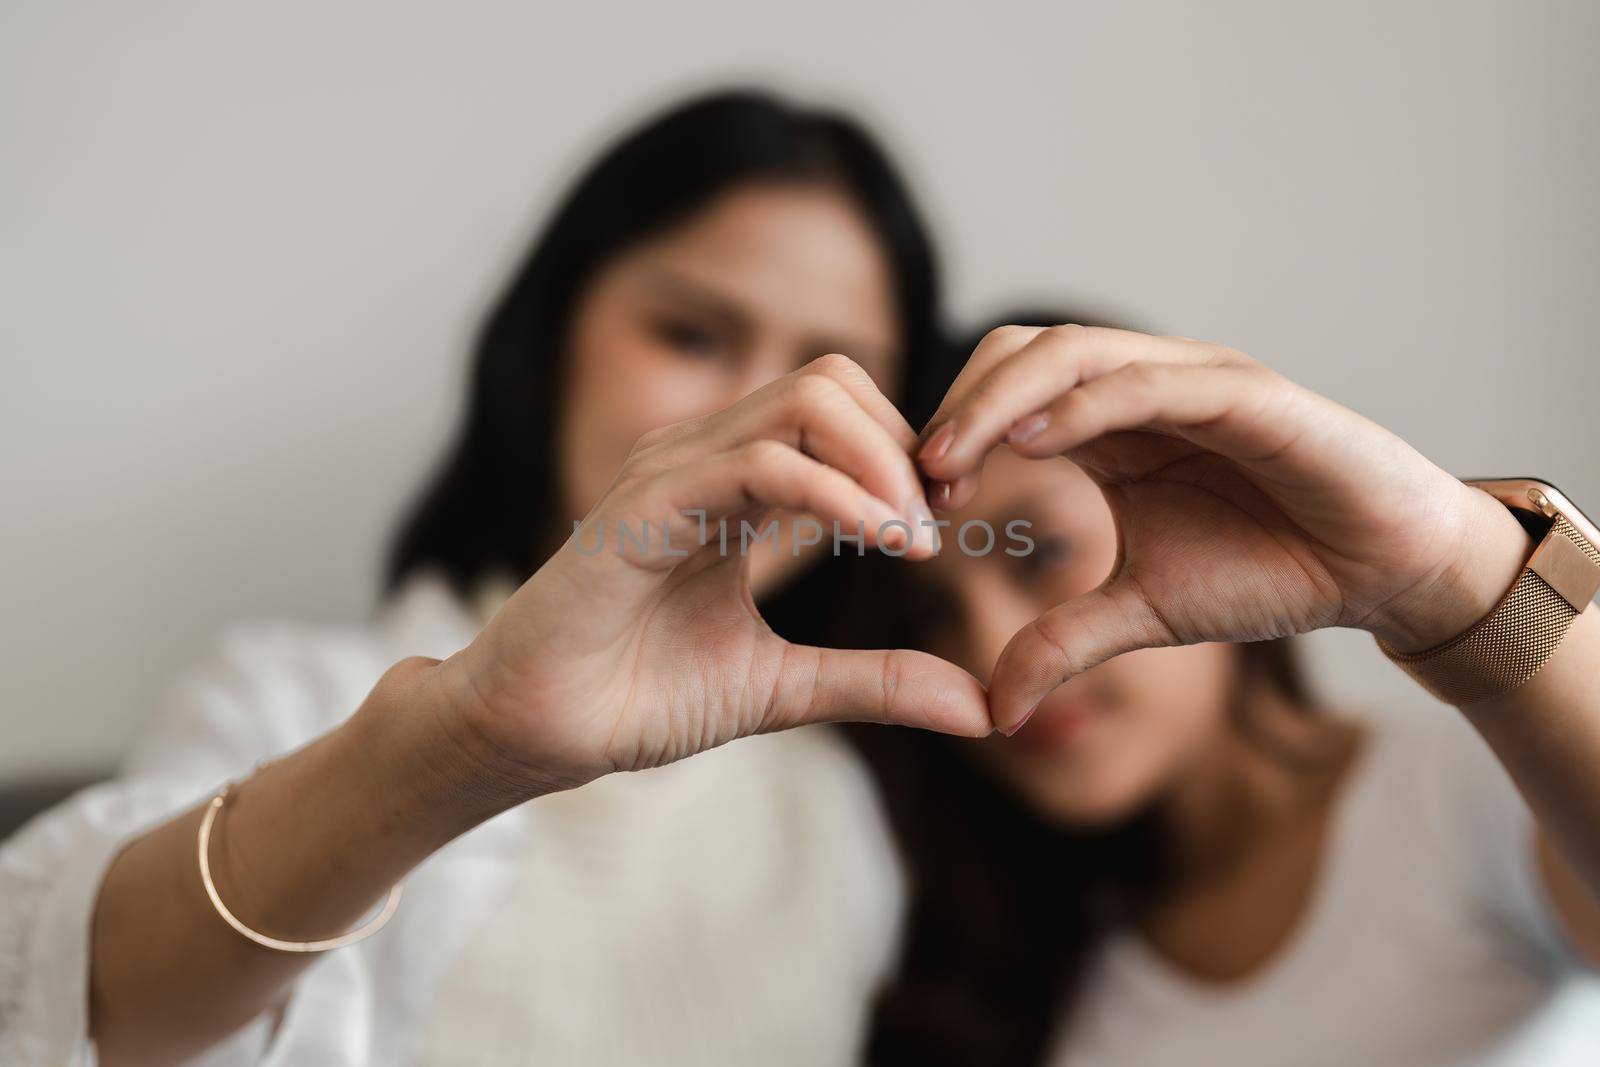 Lesbian lifestyle girlfriends doing heart shape symbol with hands.